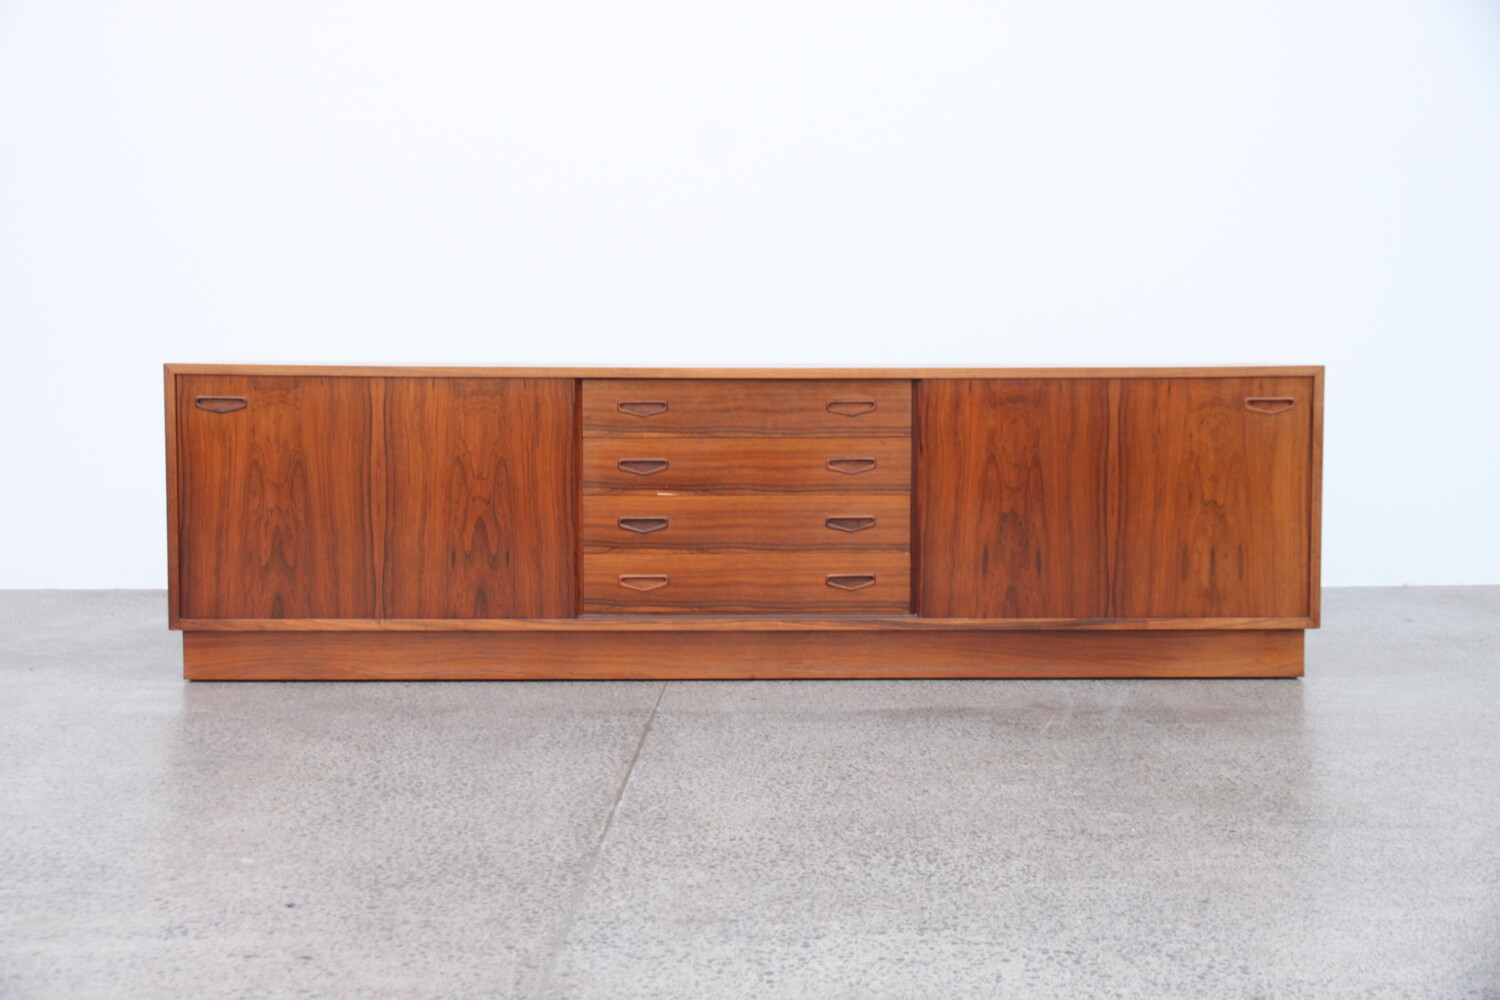 Sideboard by Clausen & Son